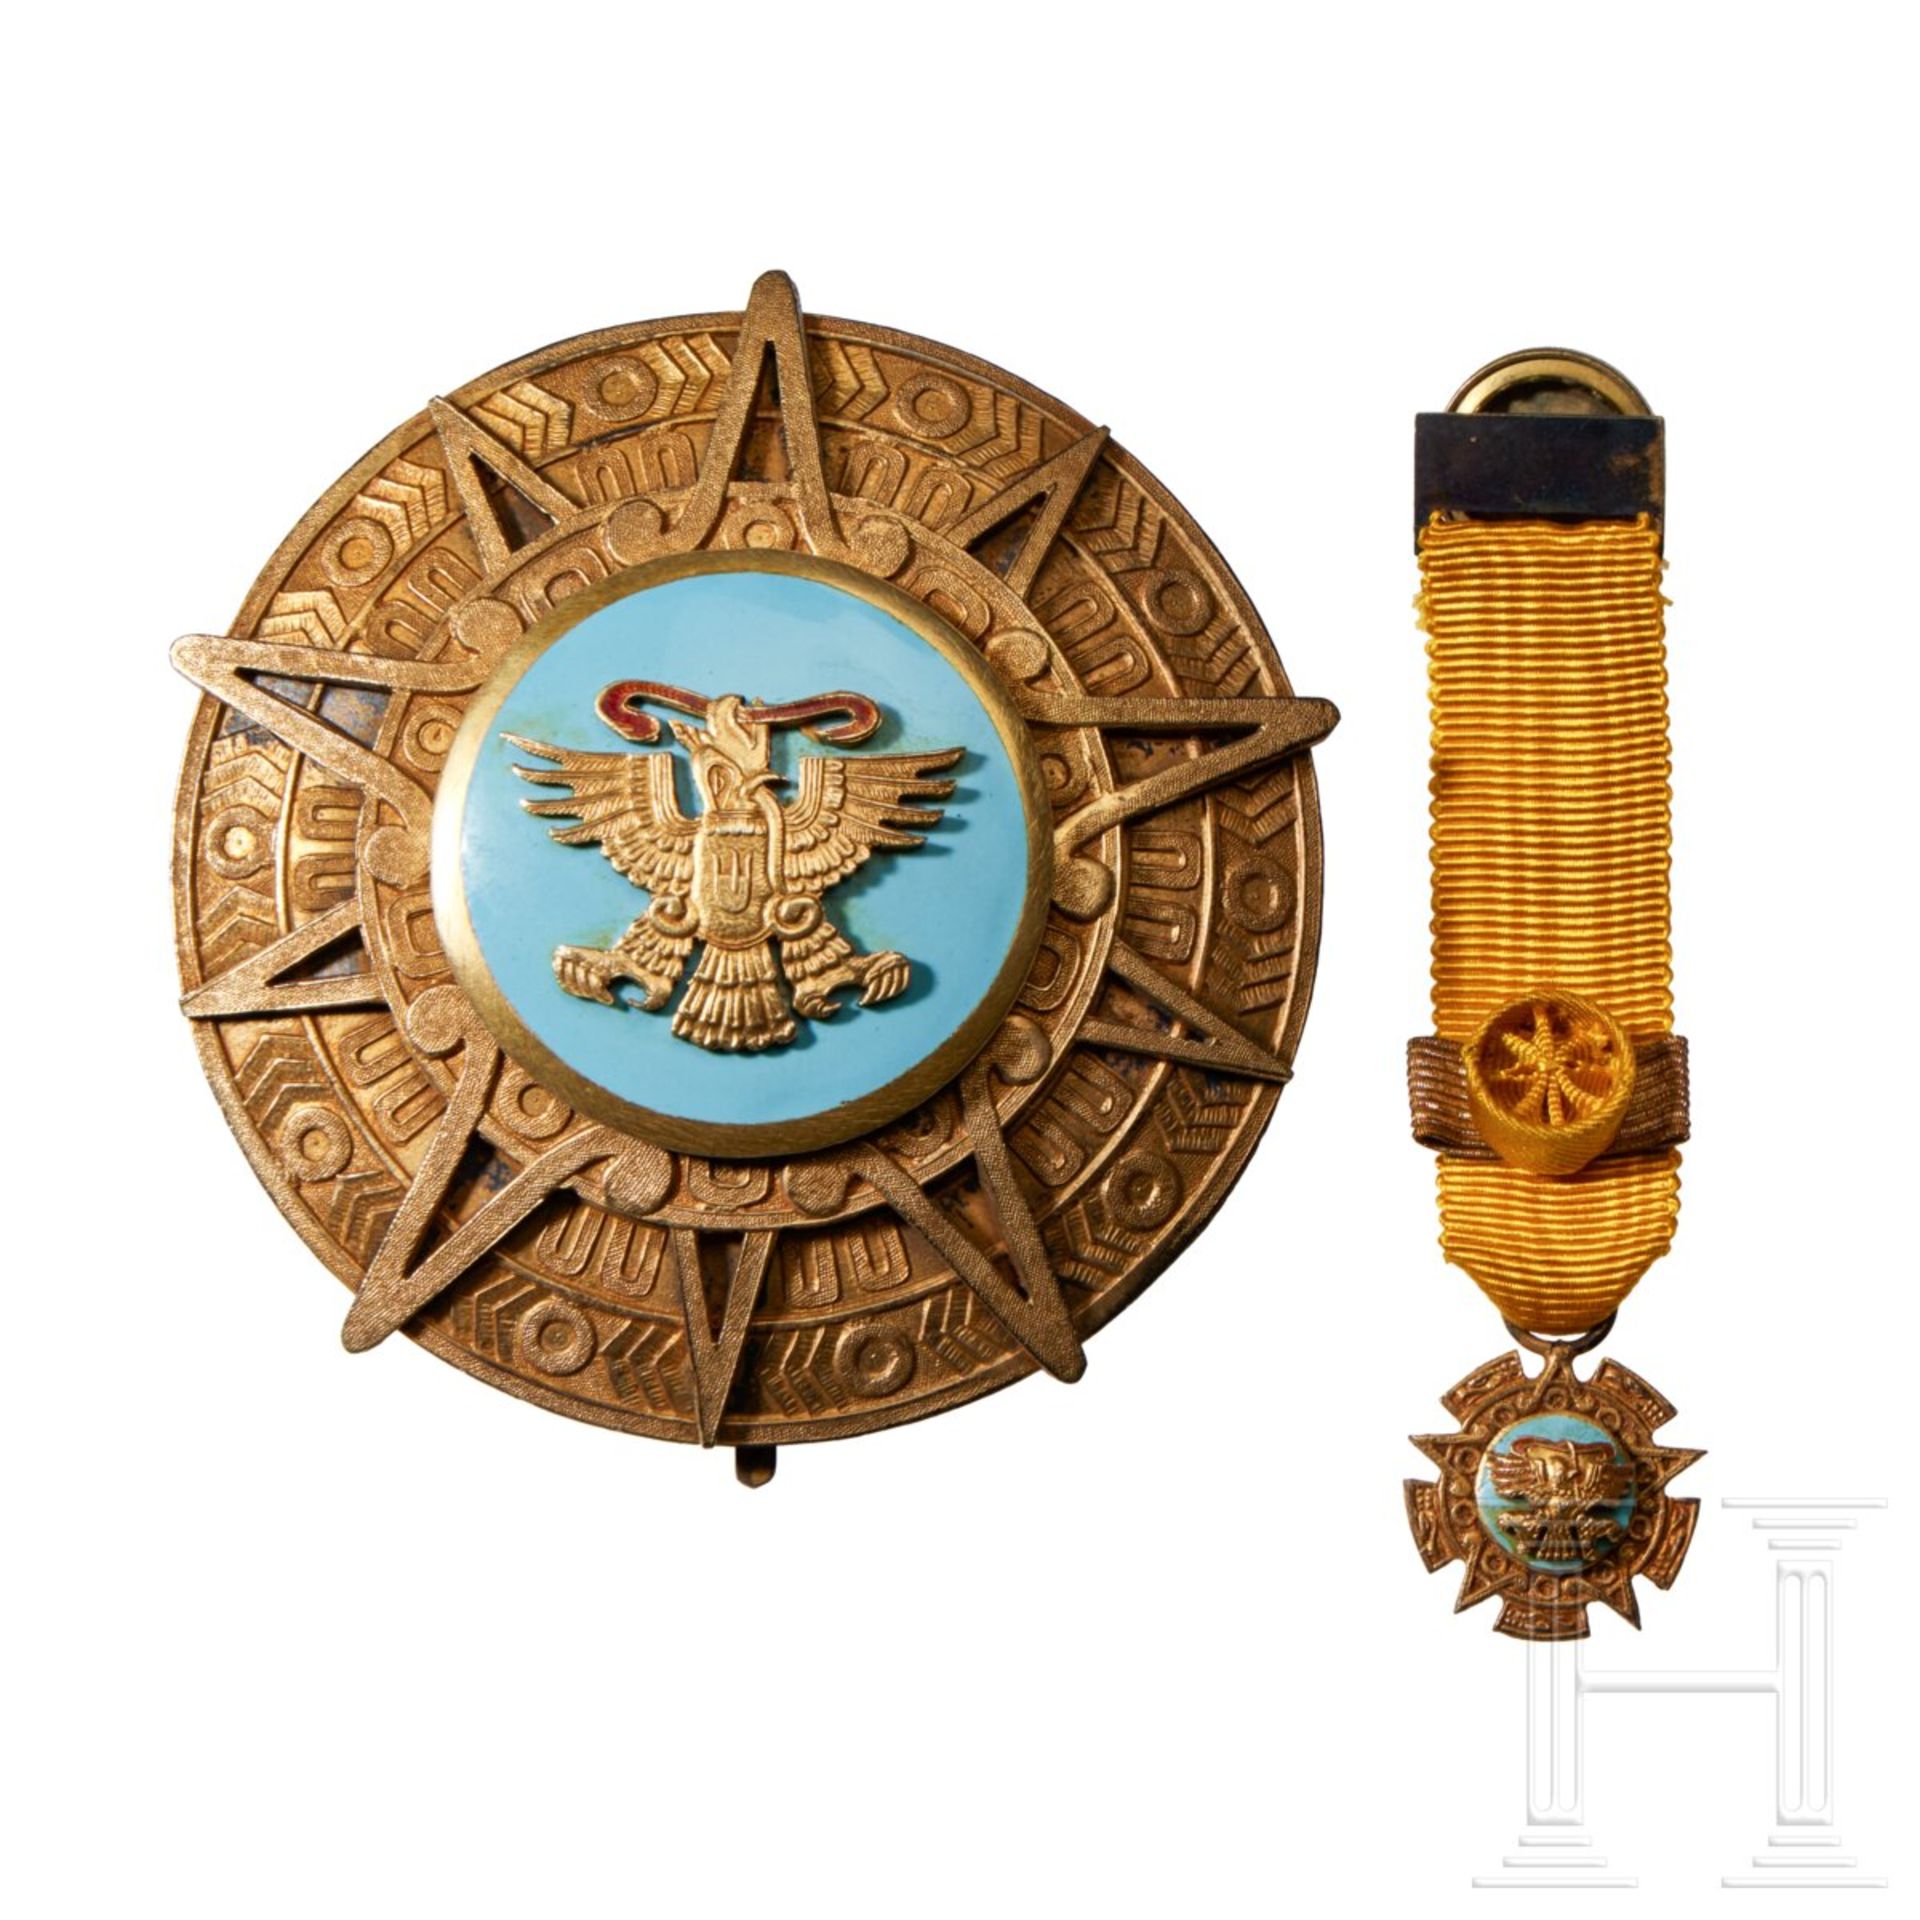 A Mexican Order of the Aztec Eagle Grand Cross - Image 5 of 8